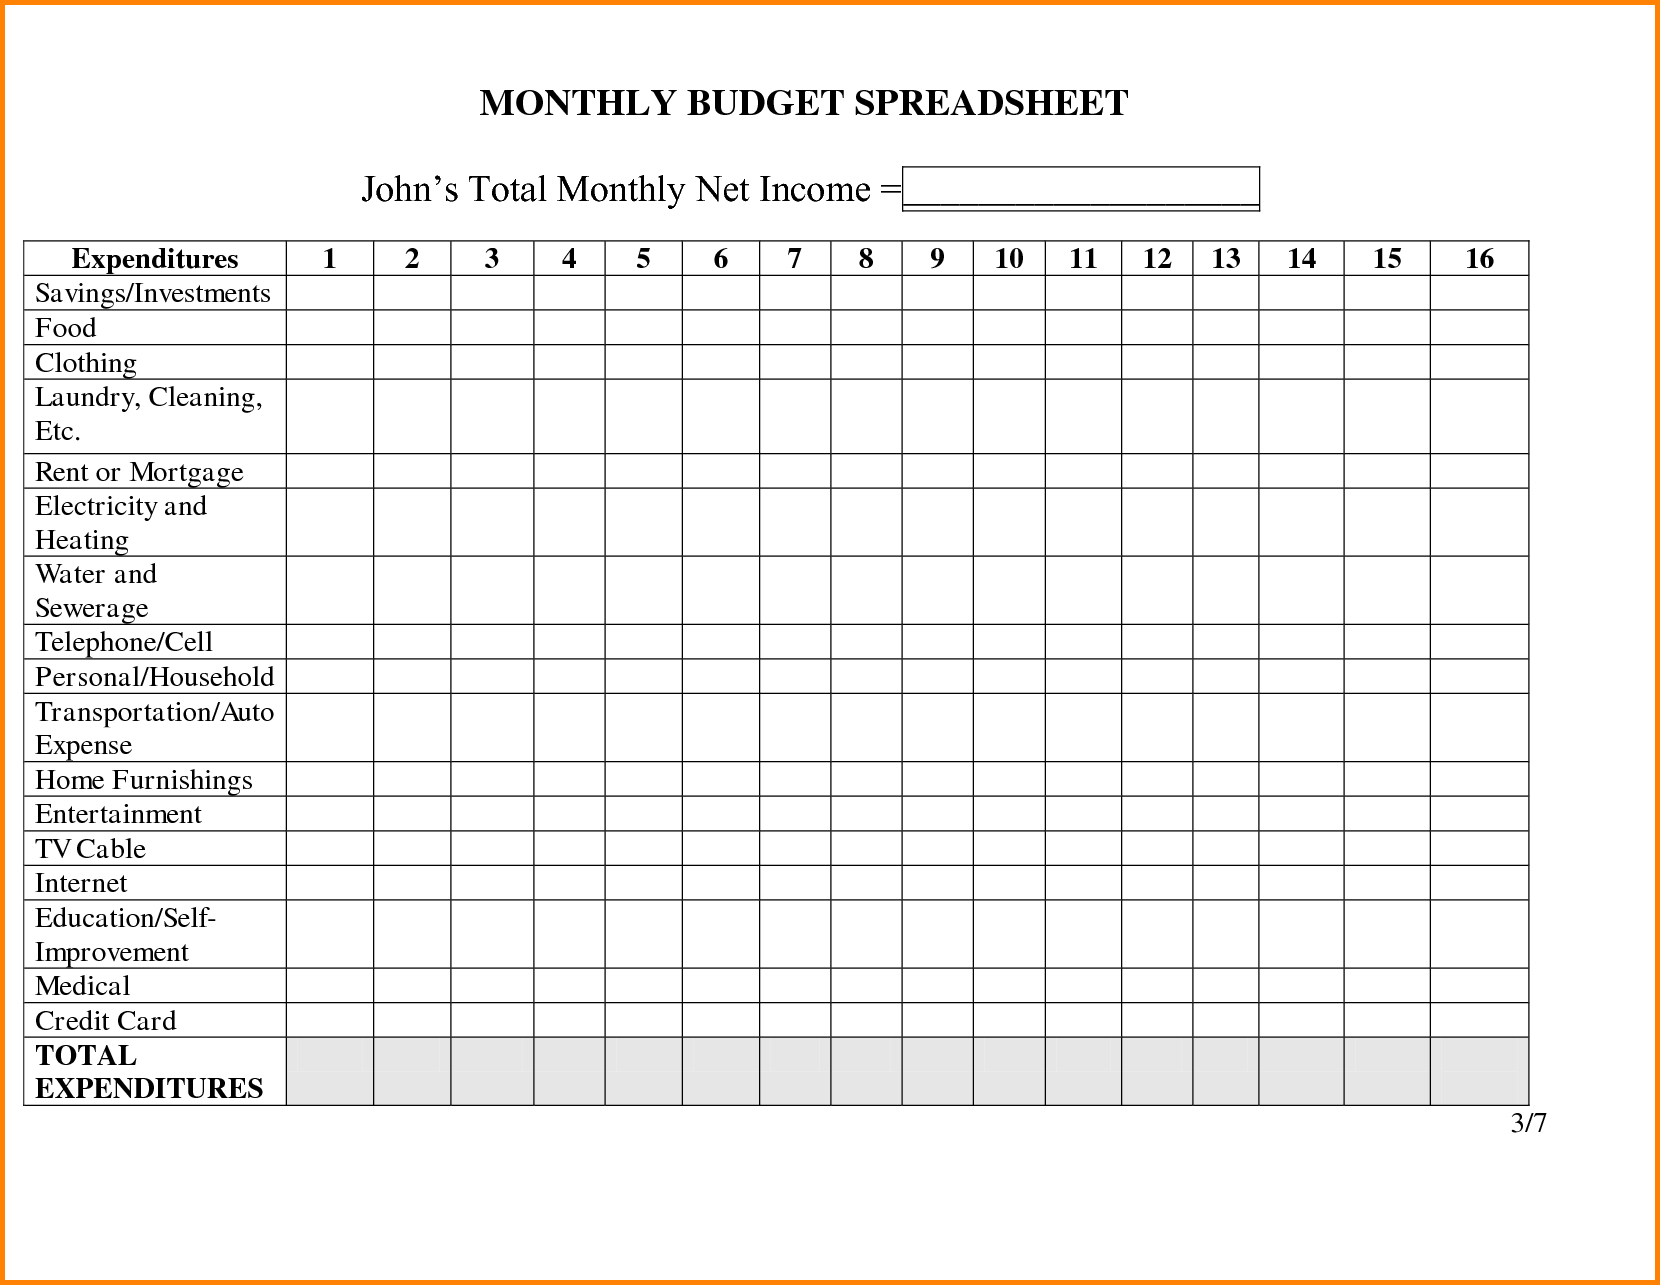 Monthly Household Budget Adsheet Family Template Worksheet Printable - Free Printable Monthly Household Budget Sheet